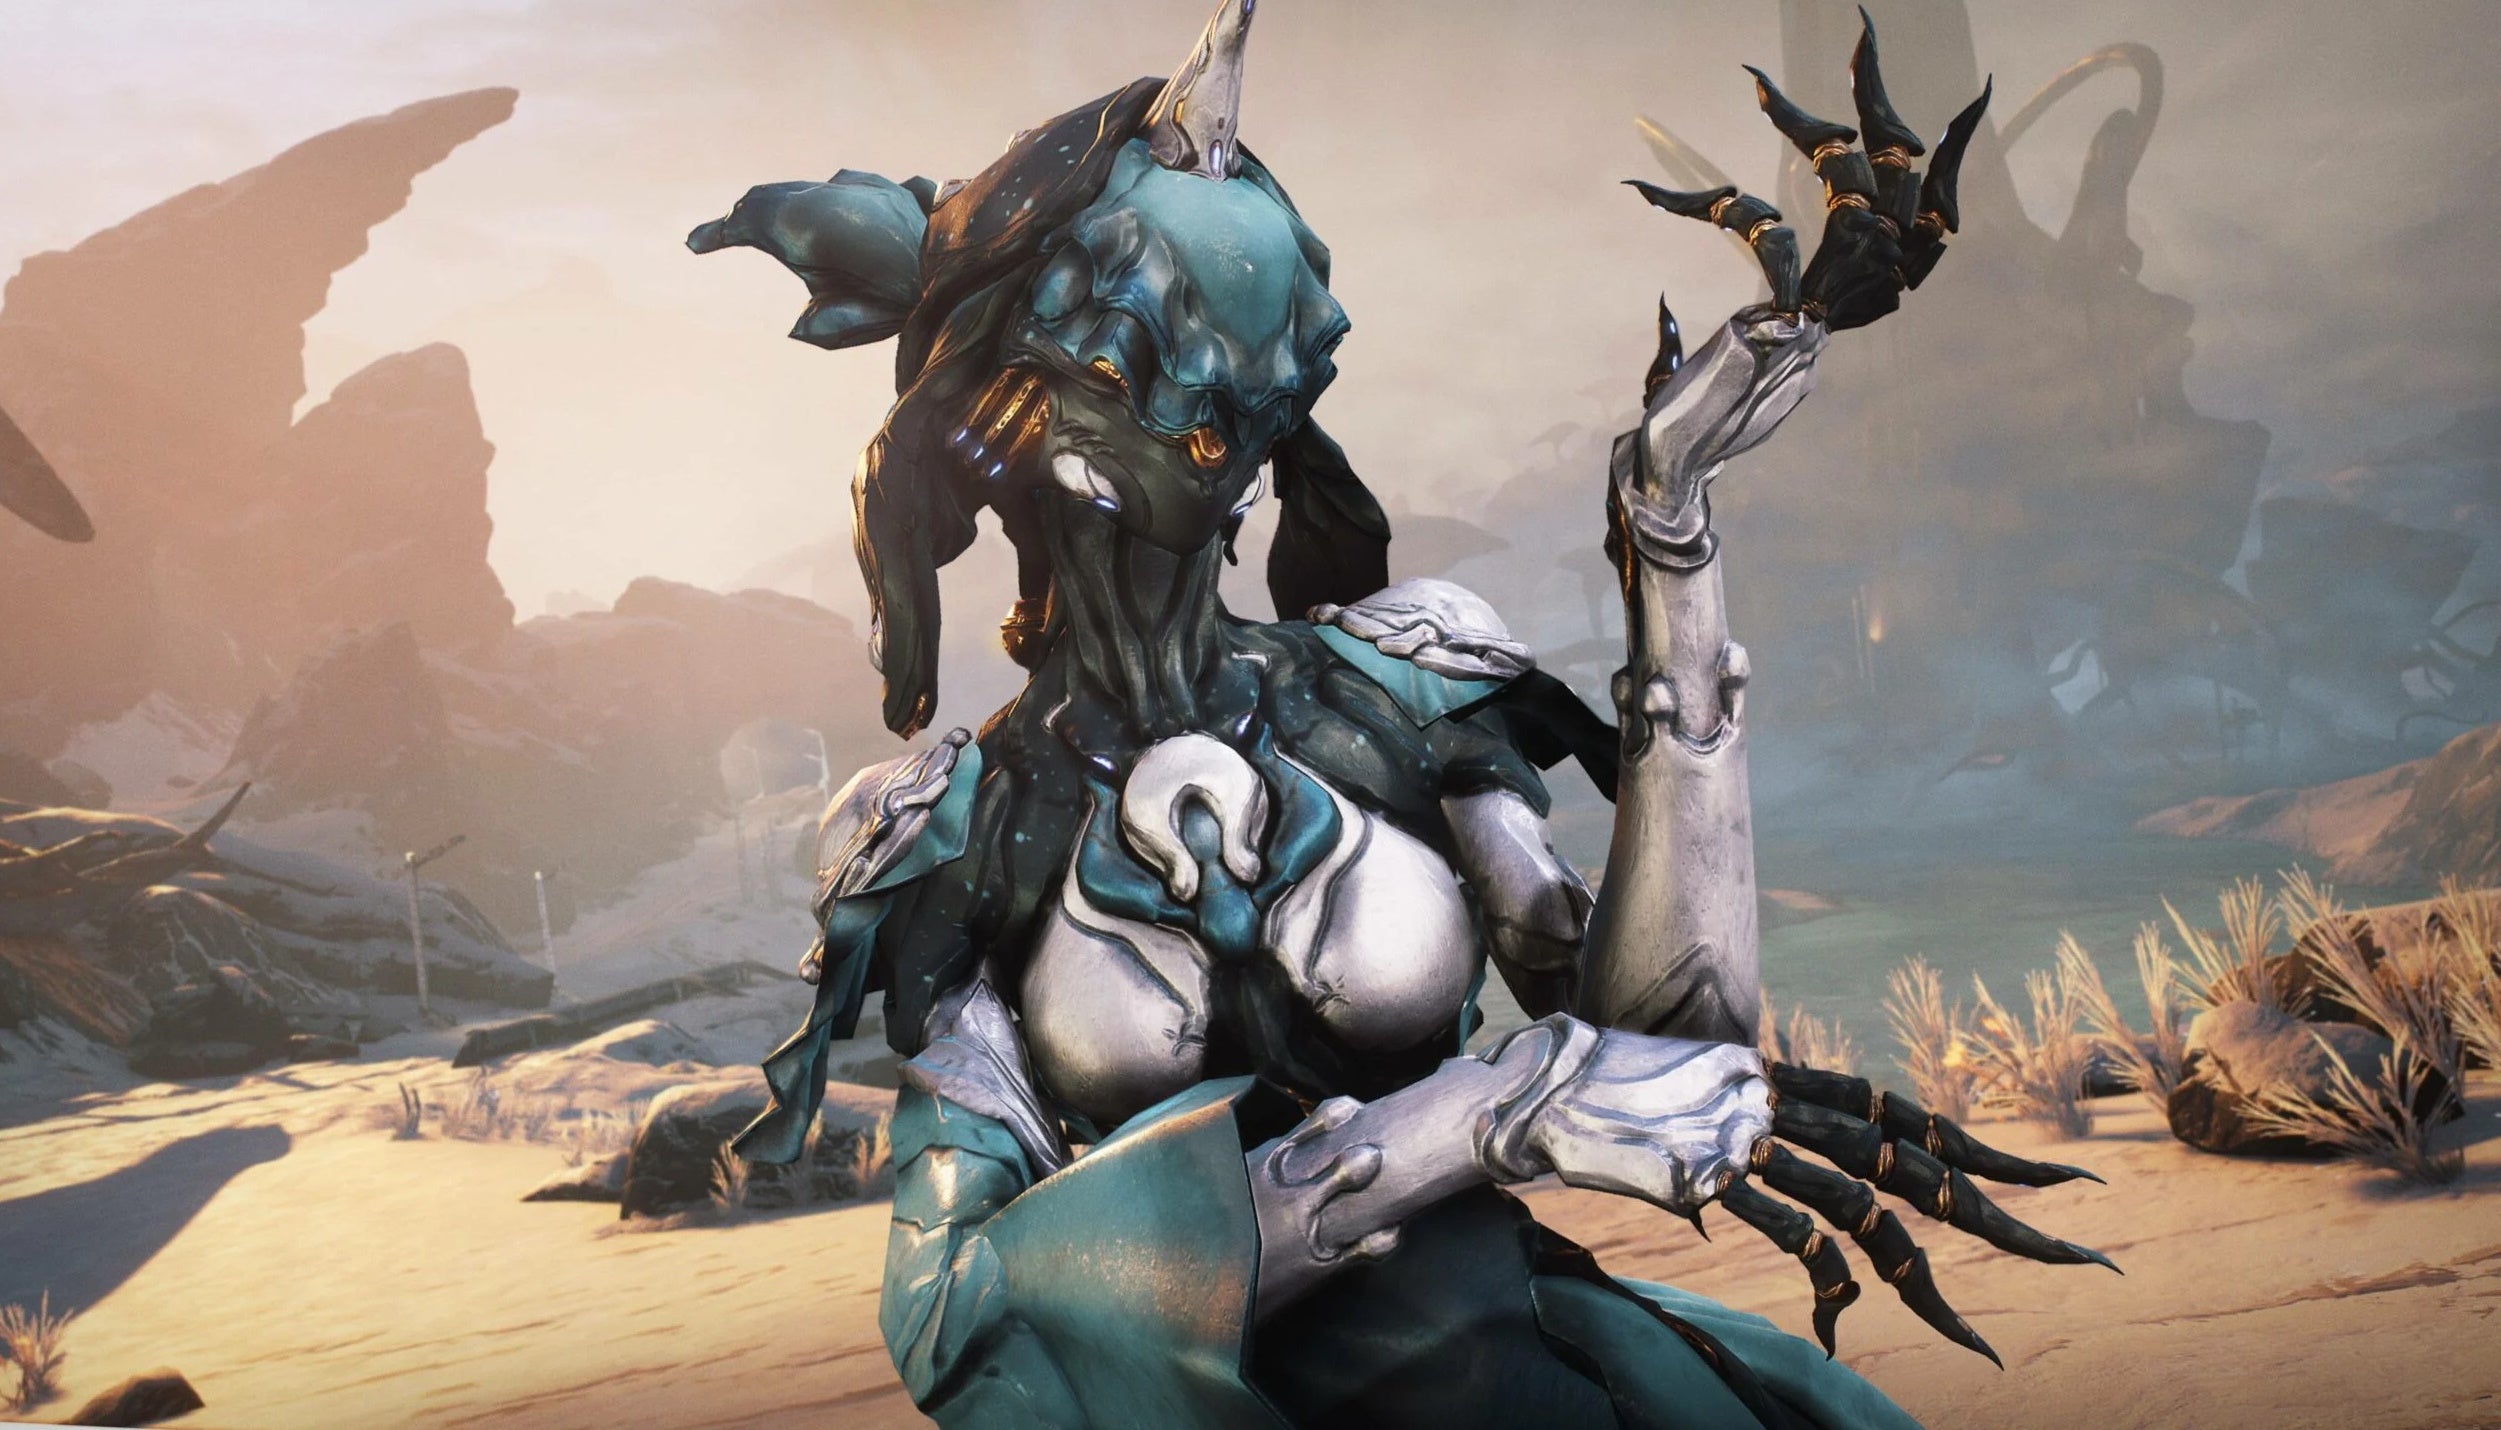 Image for Warframe Tenet Weapons: How to get Tenet Weapons and a Sister of Parvos